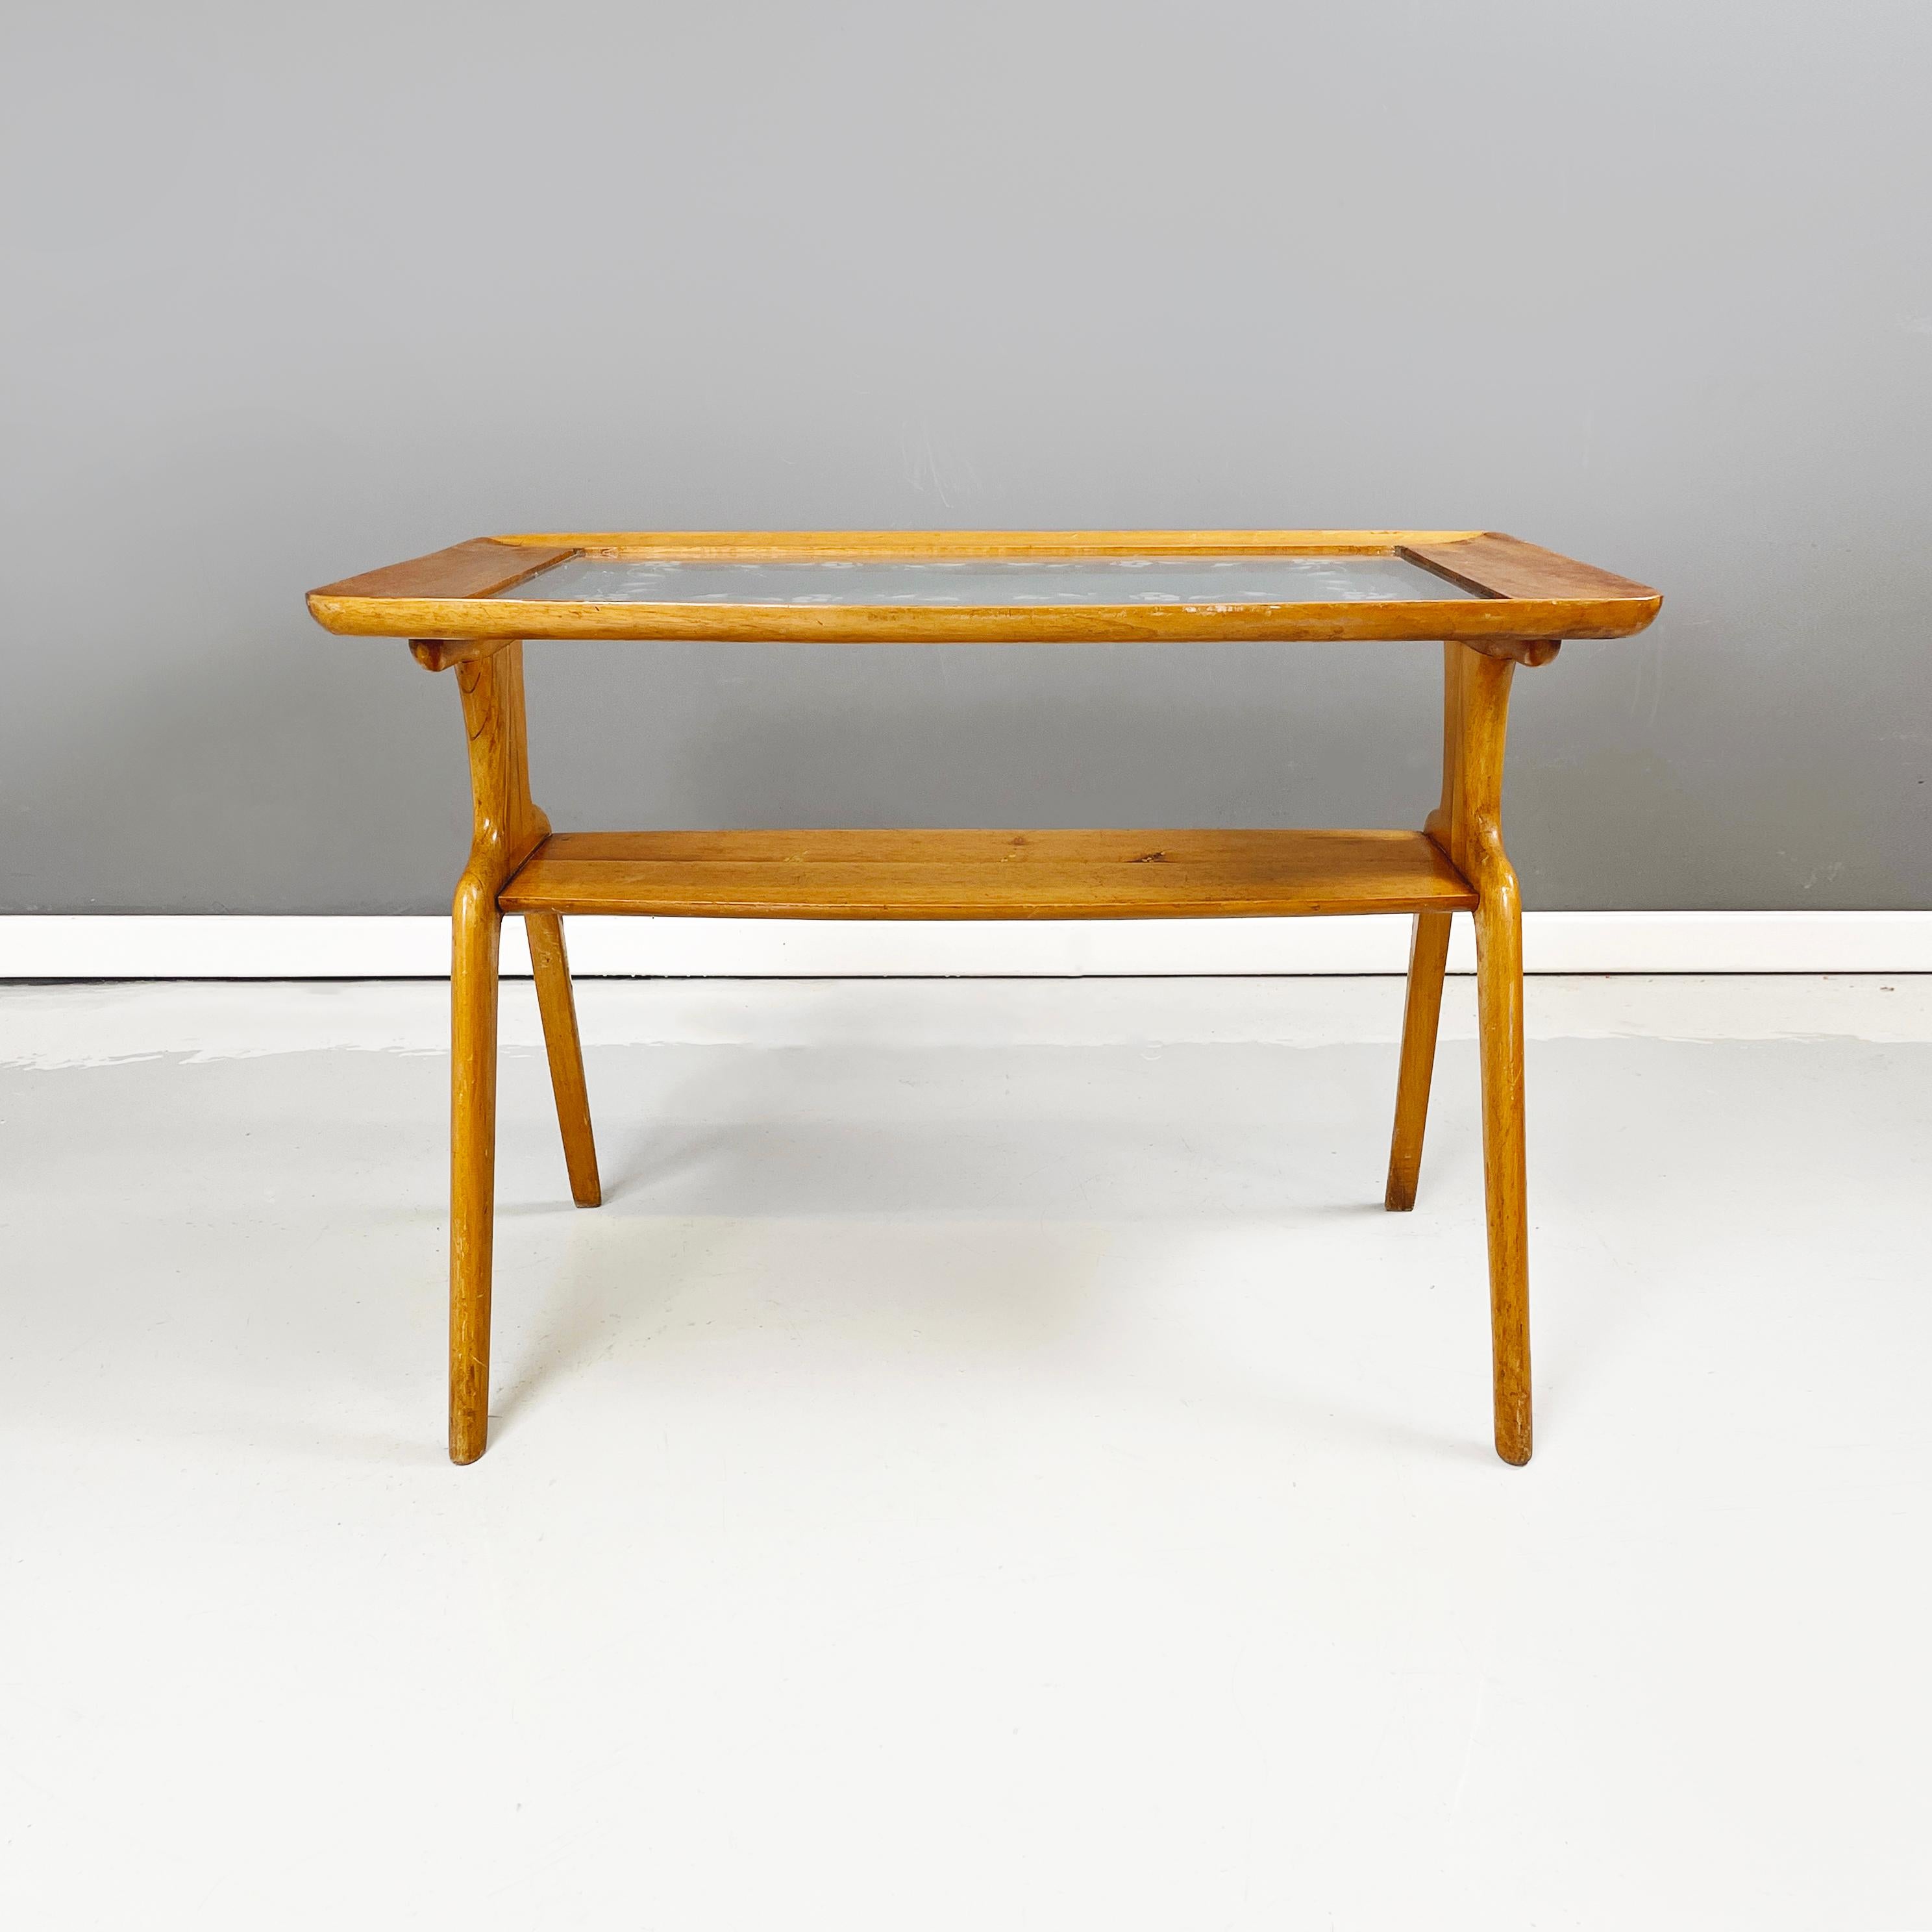 Italian mid-century modern Coffee table in wood and decorated glass, 1950s
Coffee table with glass top decorated with floral motifs and wooden profile. The structure is made of light wood. Under the floor there is a second smaller shelf, which can